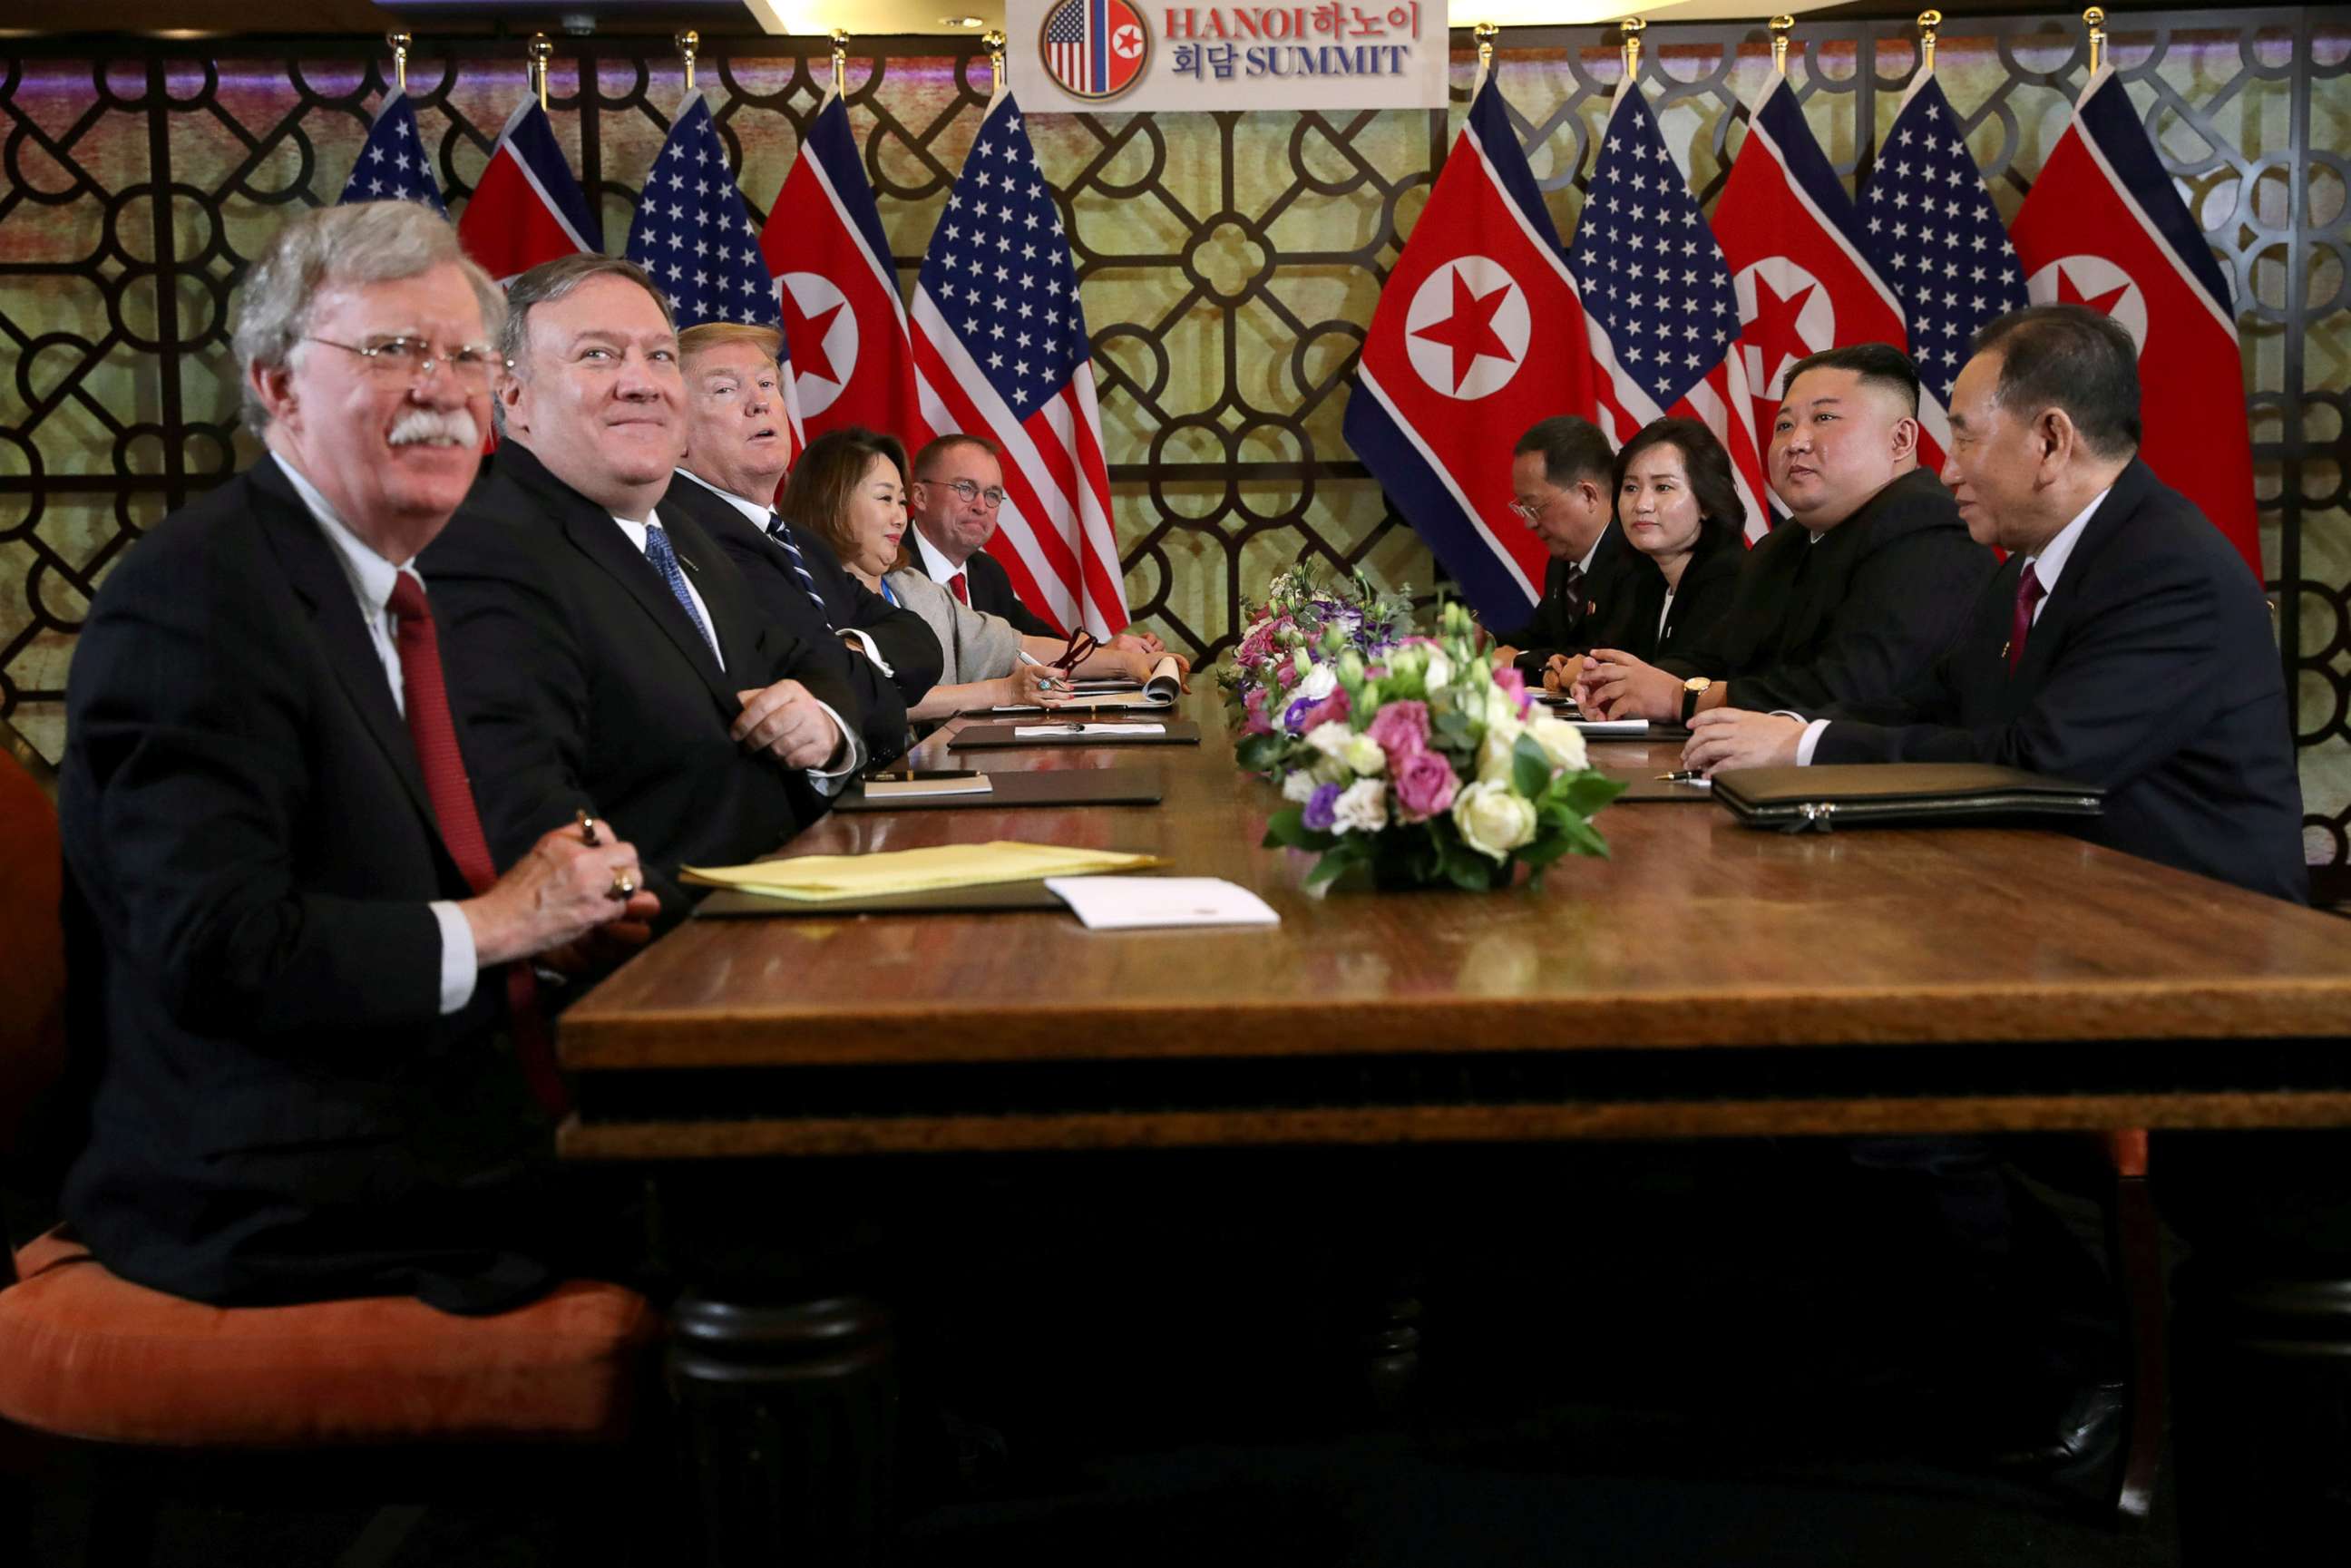 PHOTO: North Korea's leader Kim Jong Un and President Donald Trump meet along with Secretary of State Mike Pompeo, White House national security adviser John Bolton, right, during the second North Korea-U.S. summit in Hanoi, Vietnam, Feb. 28, 2019.